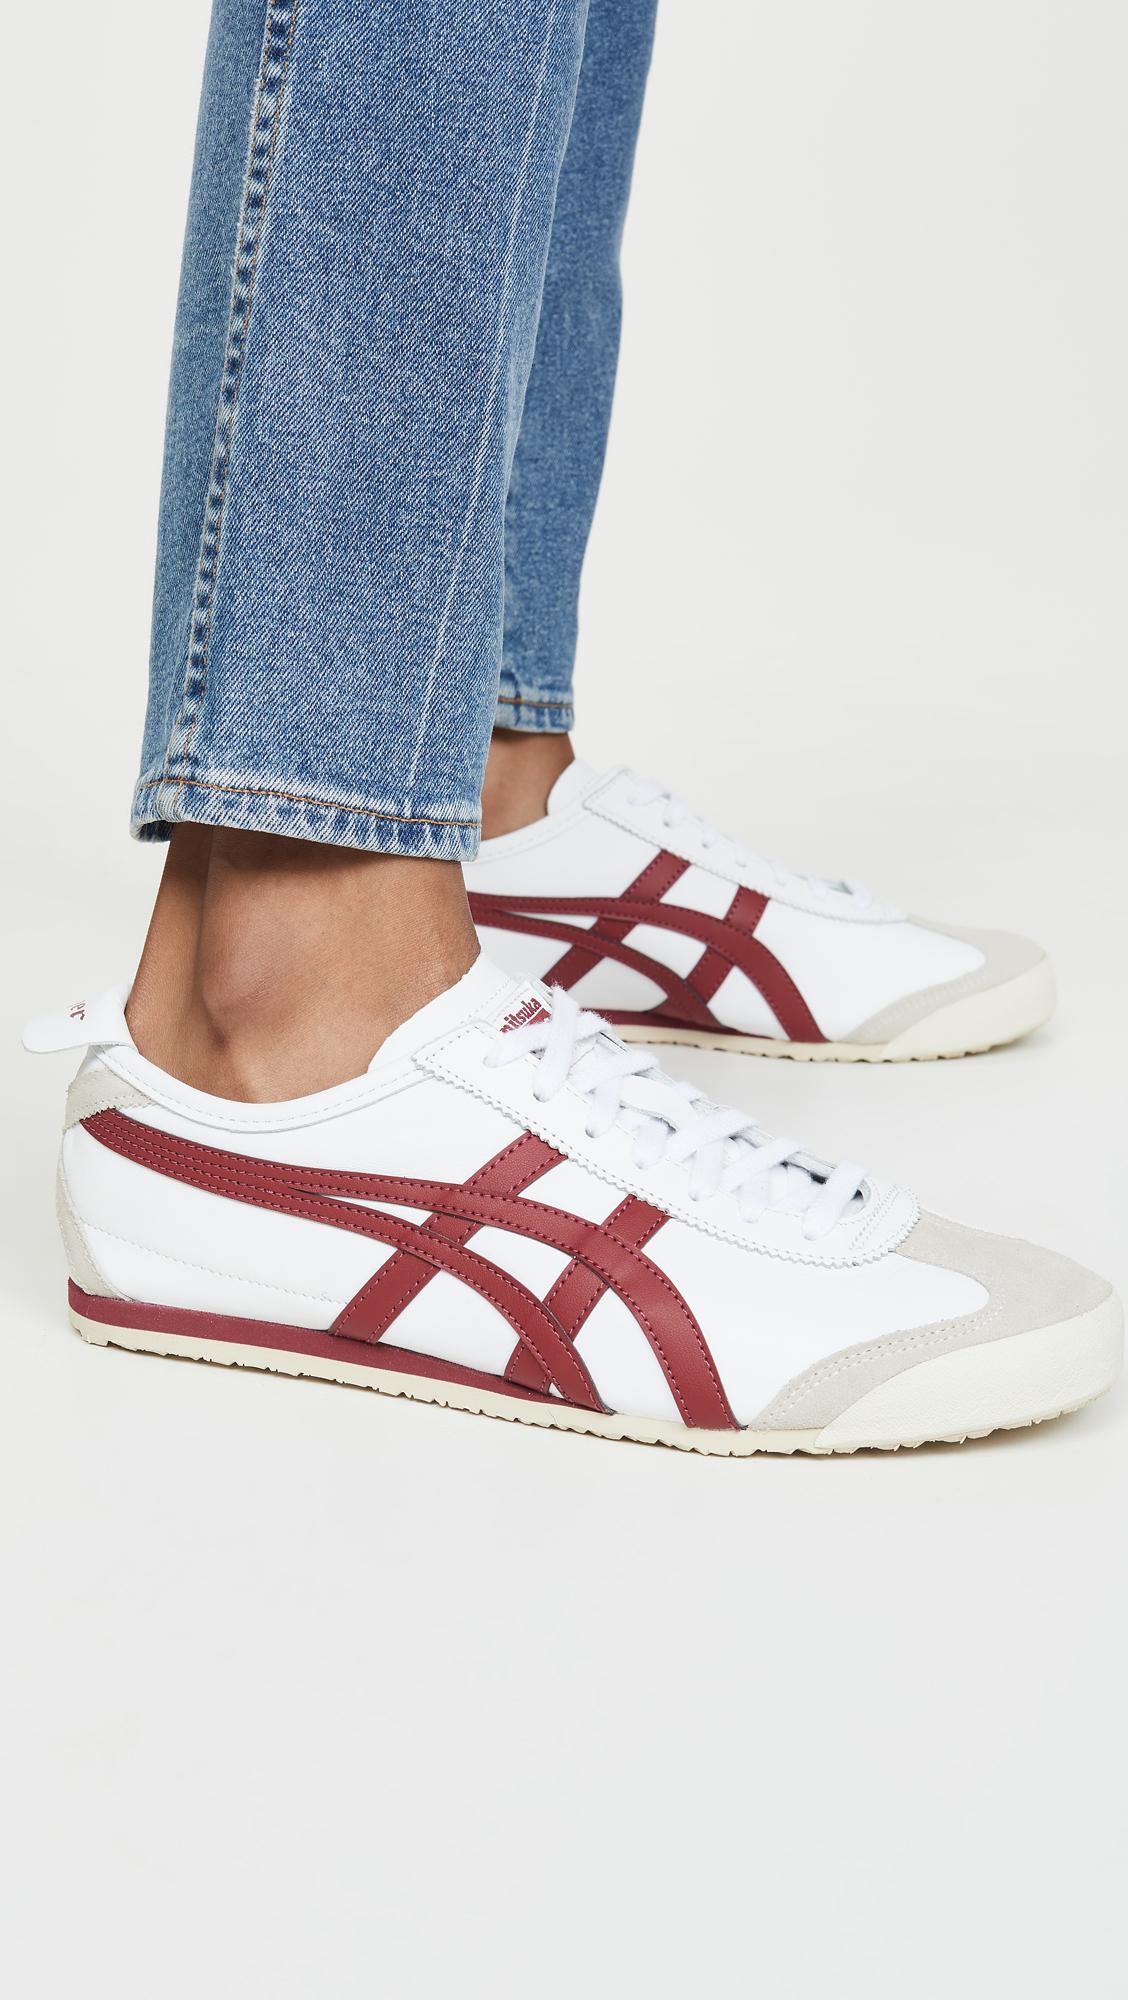 Buy > asics mexico 66 sneakers > in stock